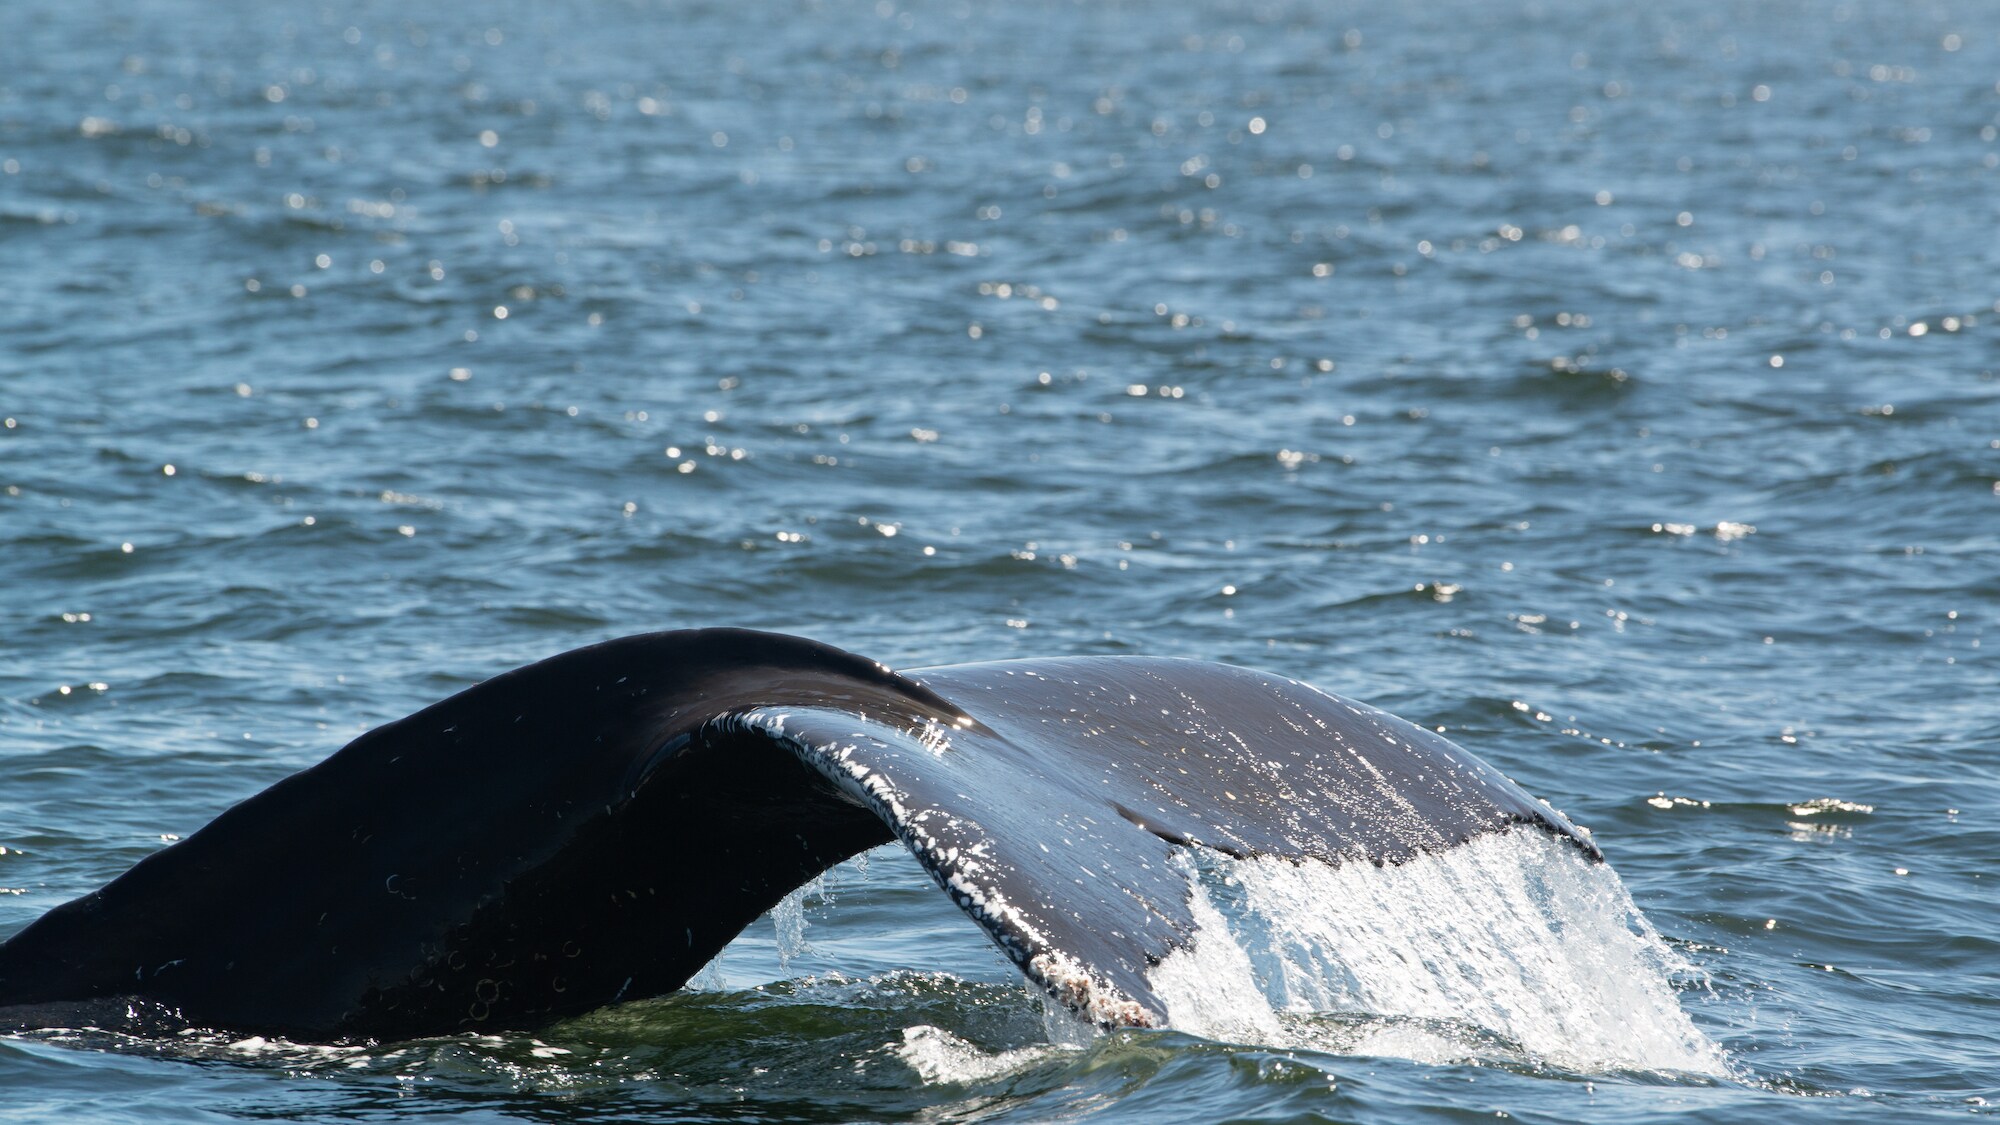 A humpback whale fluke out of water. (National Geographic for Disney+/Katrina Steele)